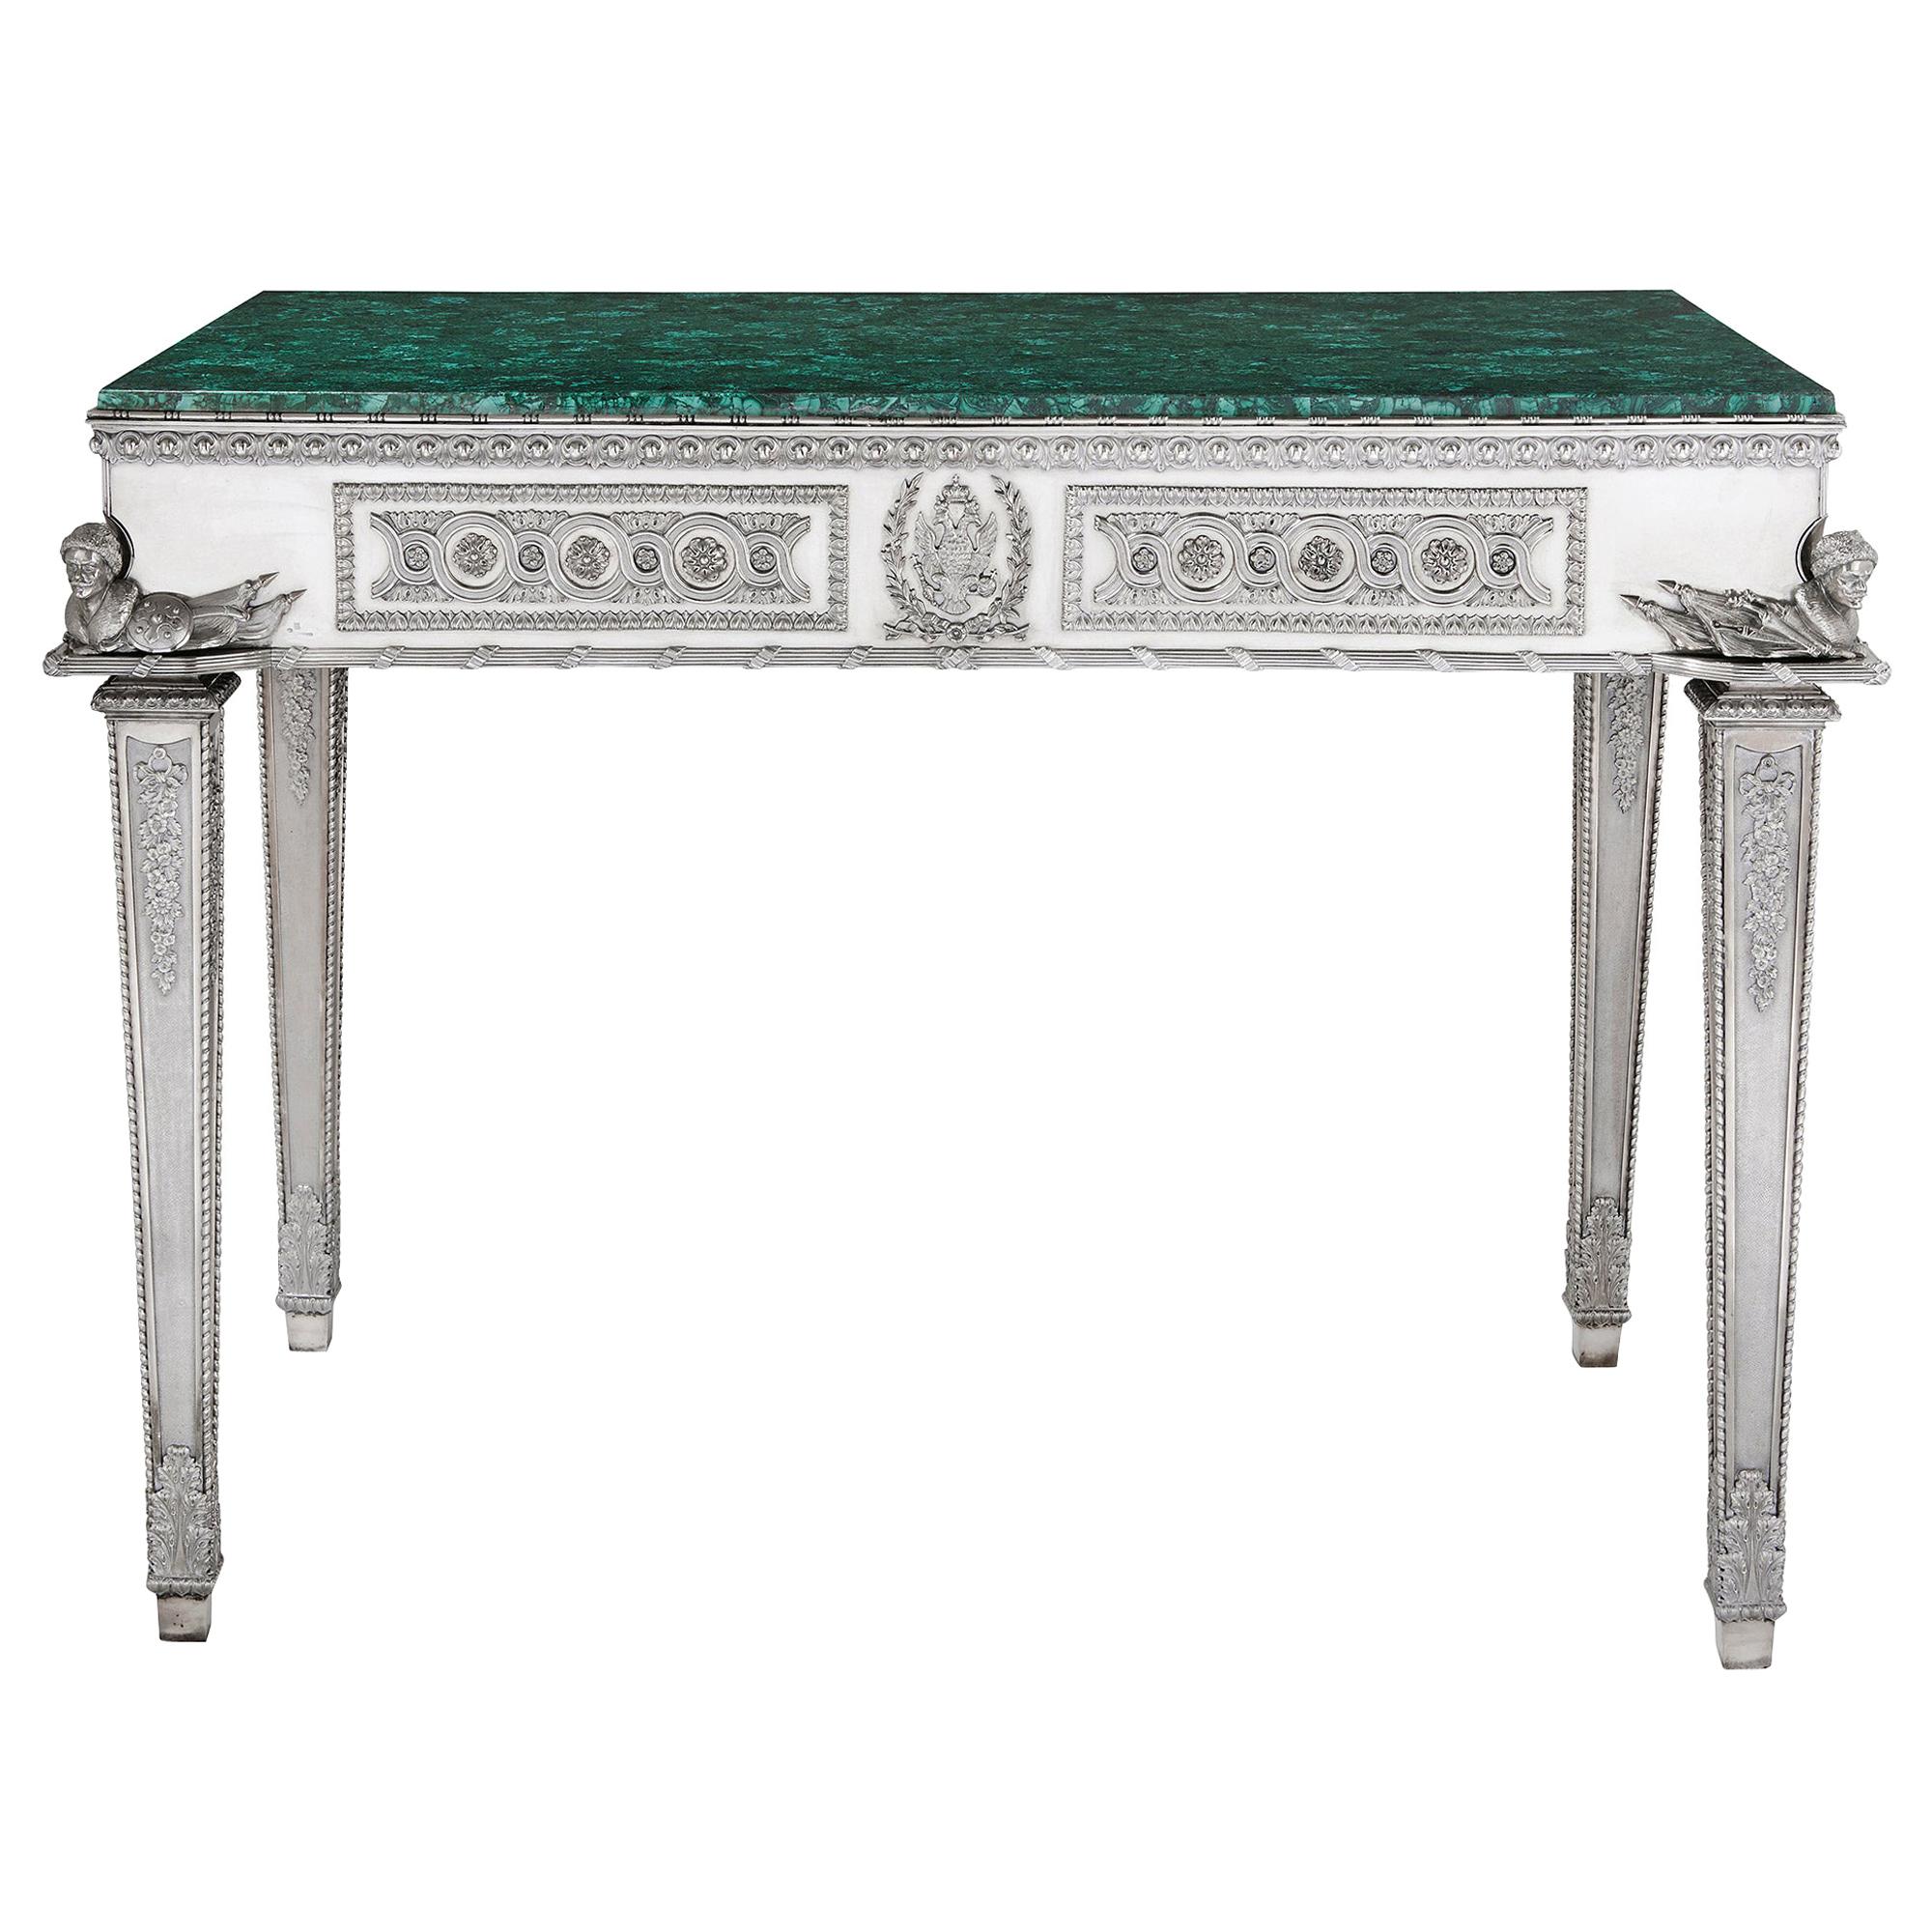 Russian Malachite and Silver Table by Imperial Silversmiths the Grachev Brothers